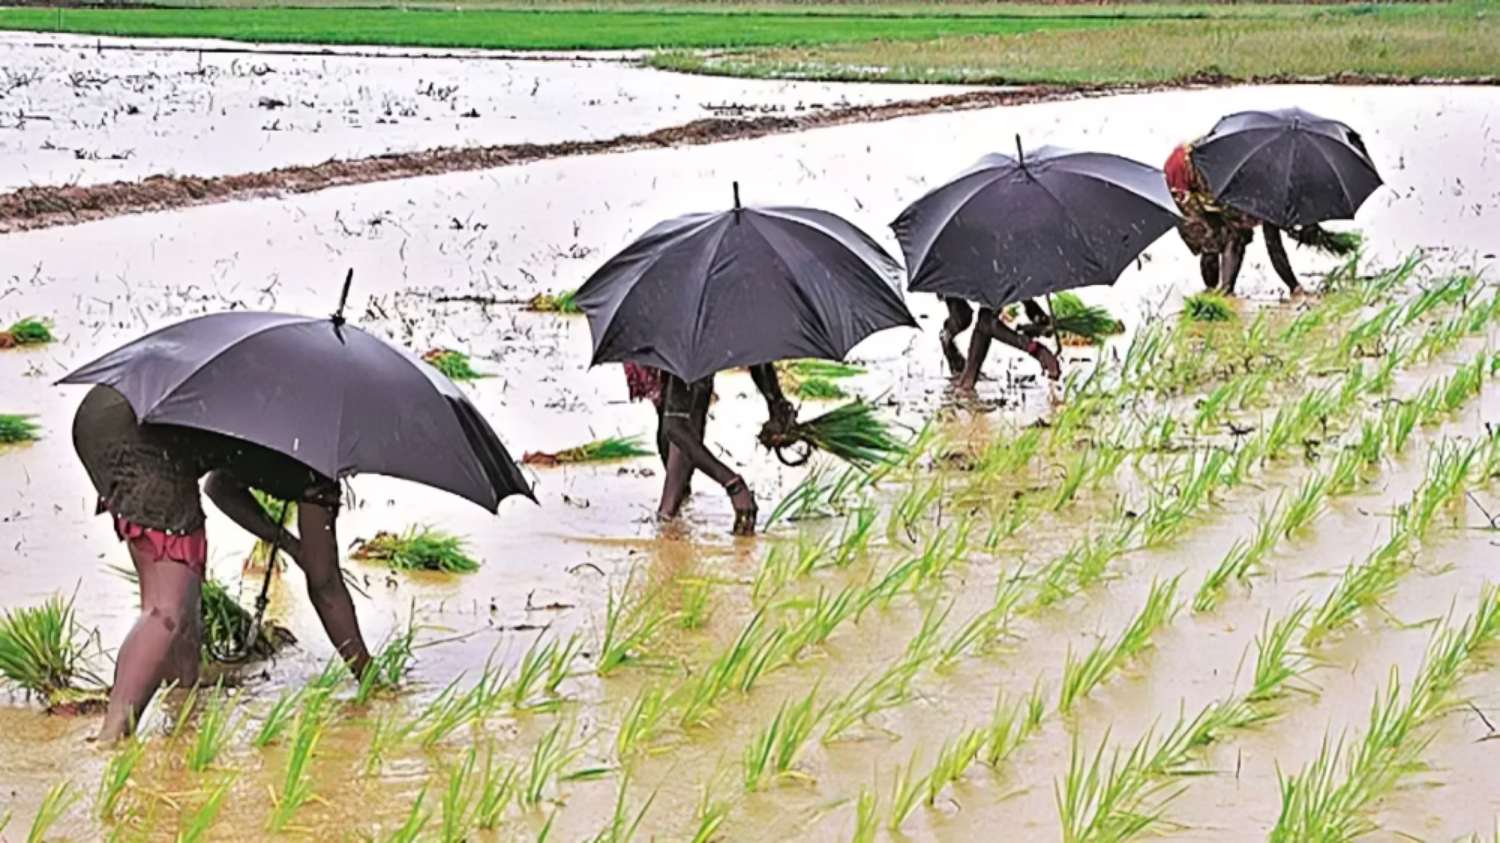 Picture of Unseasonal rain forecast in Gujarat, Agriculture Director appeals to farmers to take precautionary measures